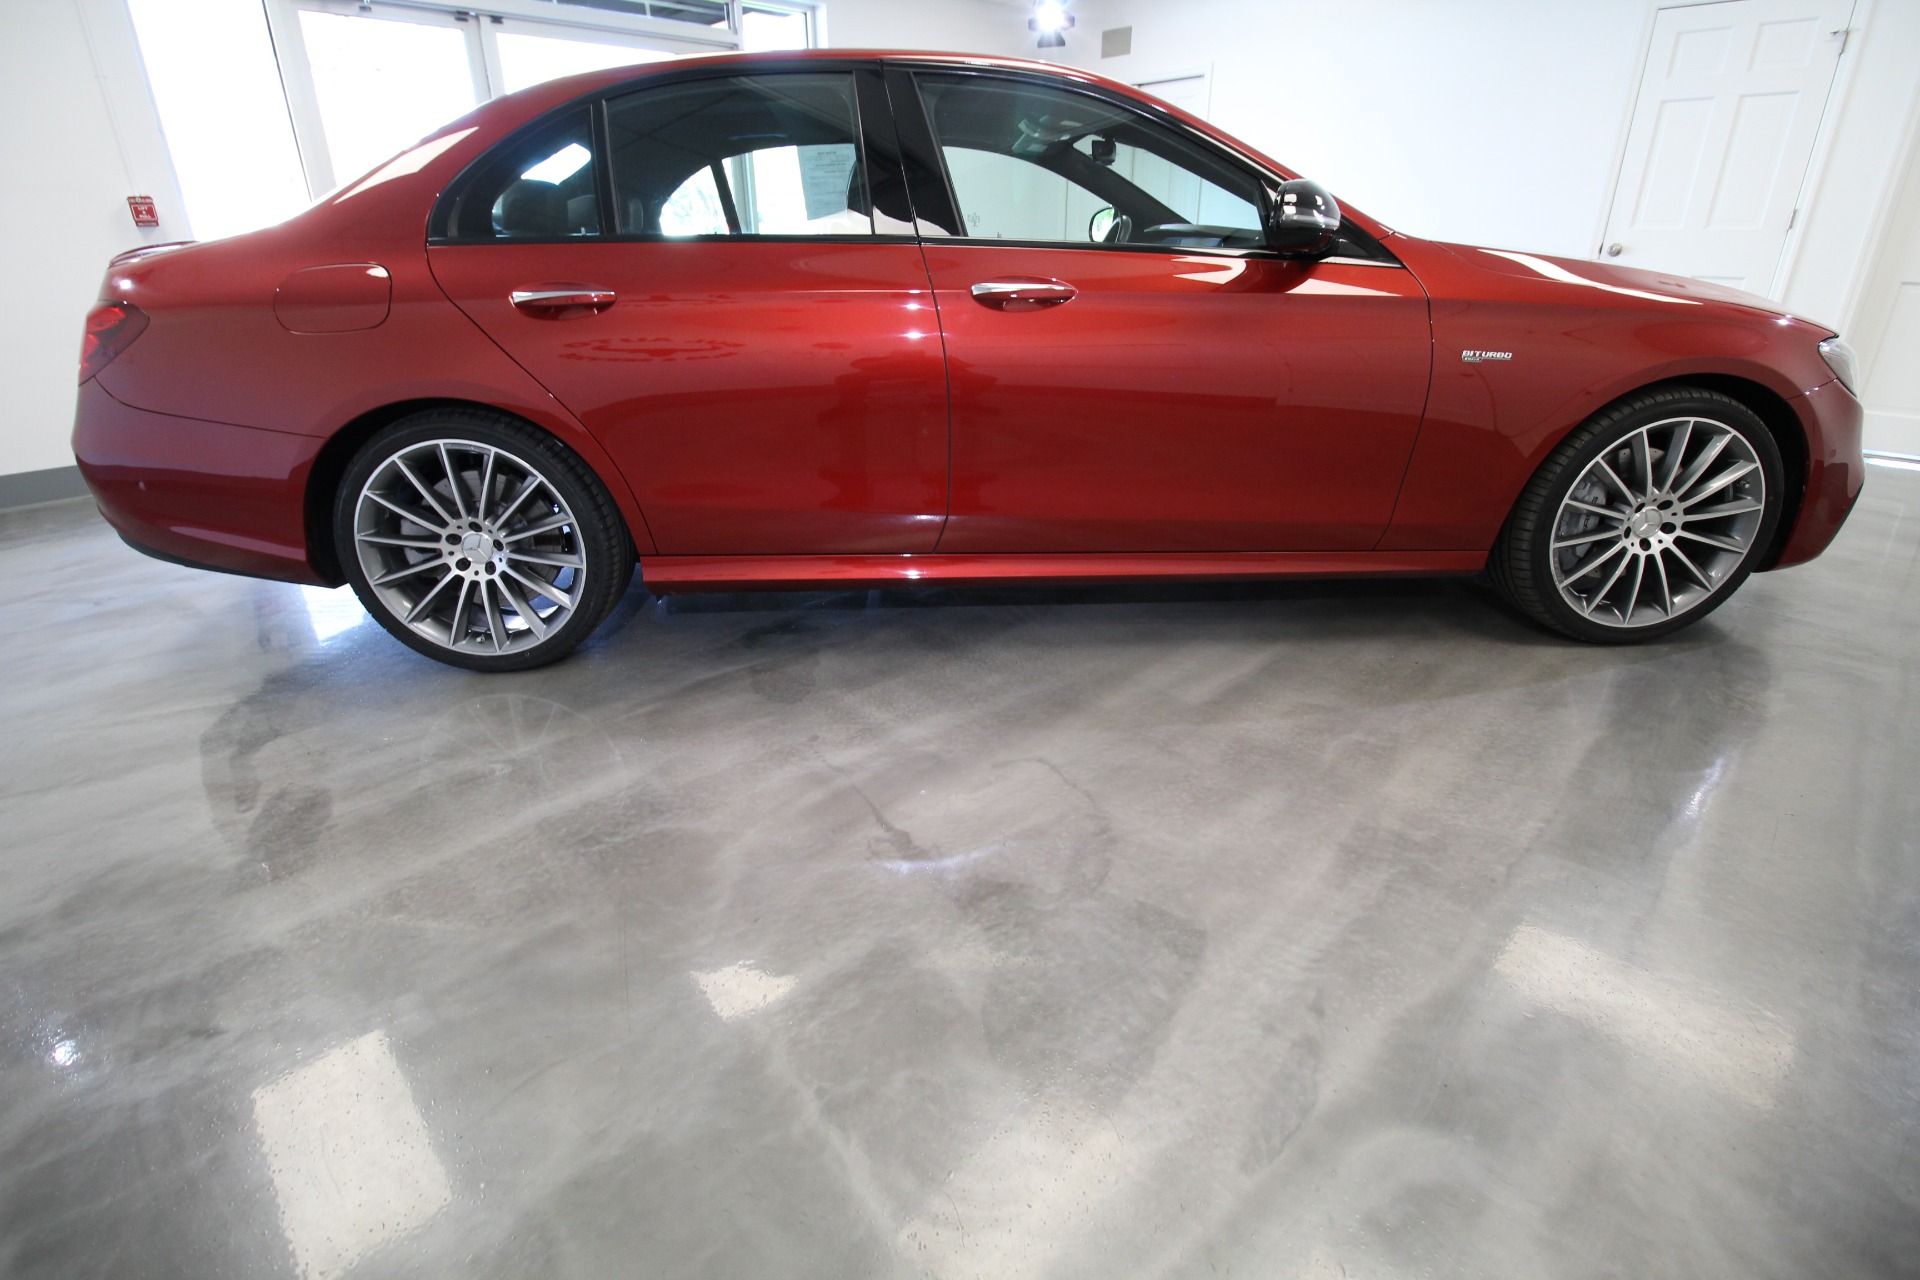 Used 2018 designo Cardinal Red Metallic Mercedes-Benz E-Class AMG E 43 4MATIC RARE COLOR COMBO LIKE NEW LOW MILES | Albany, NY